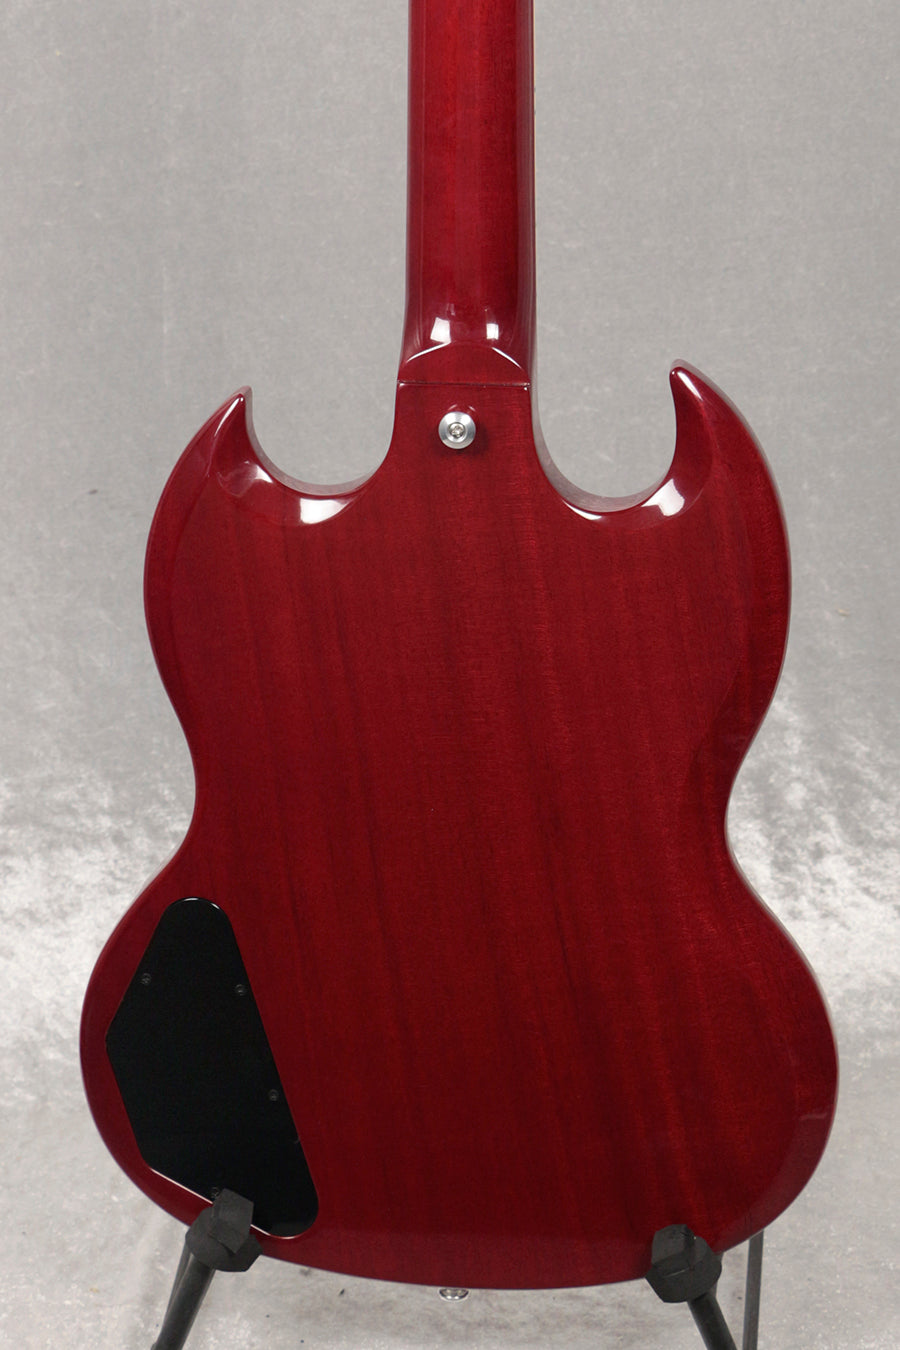 [SN 200200301] USED Gibson / SG Standard Heritage Cherry [06]